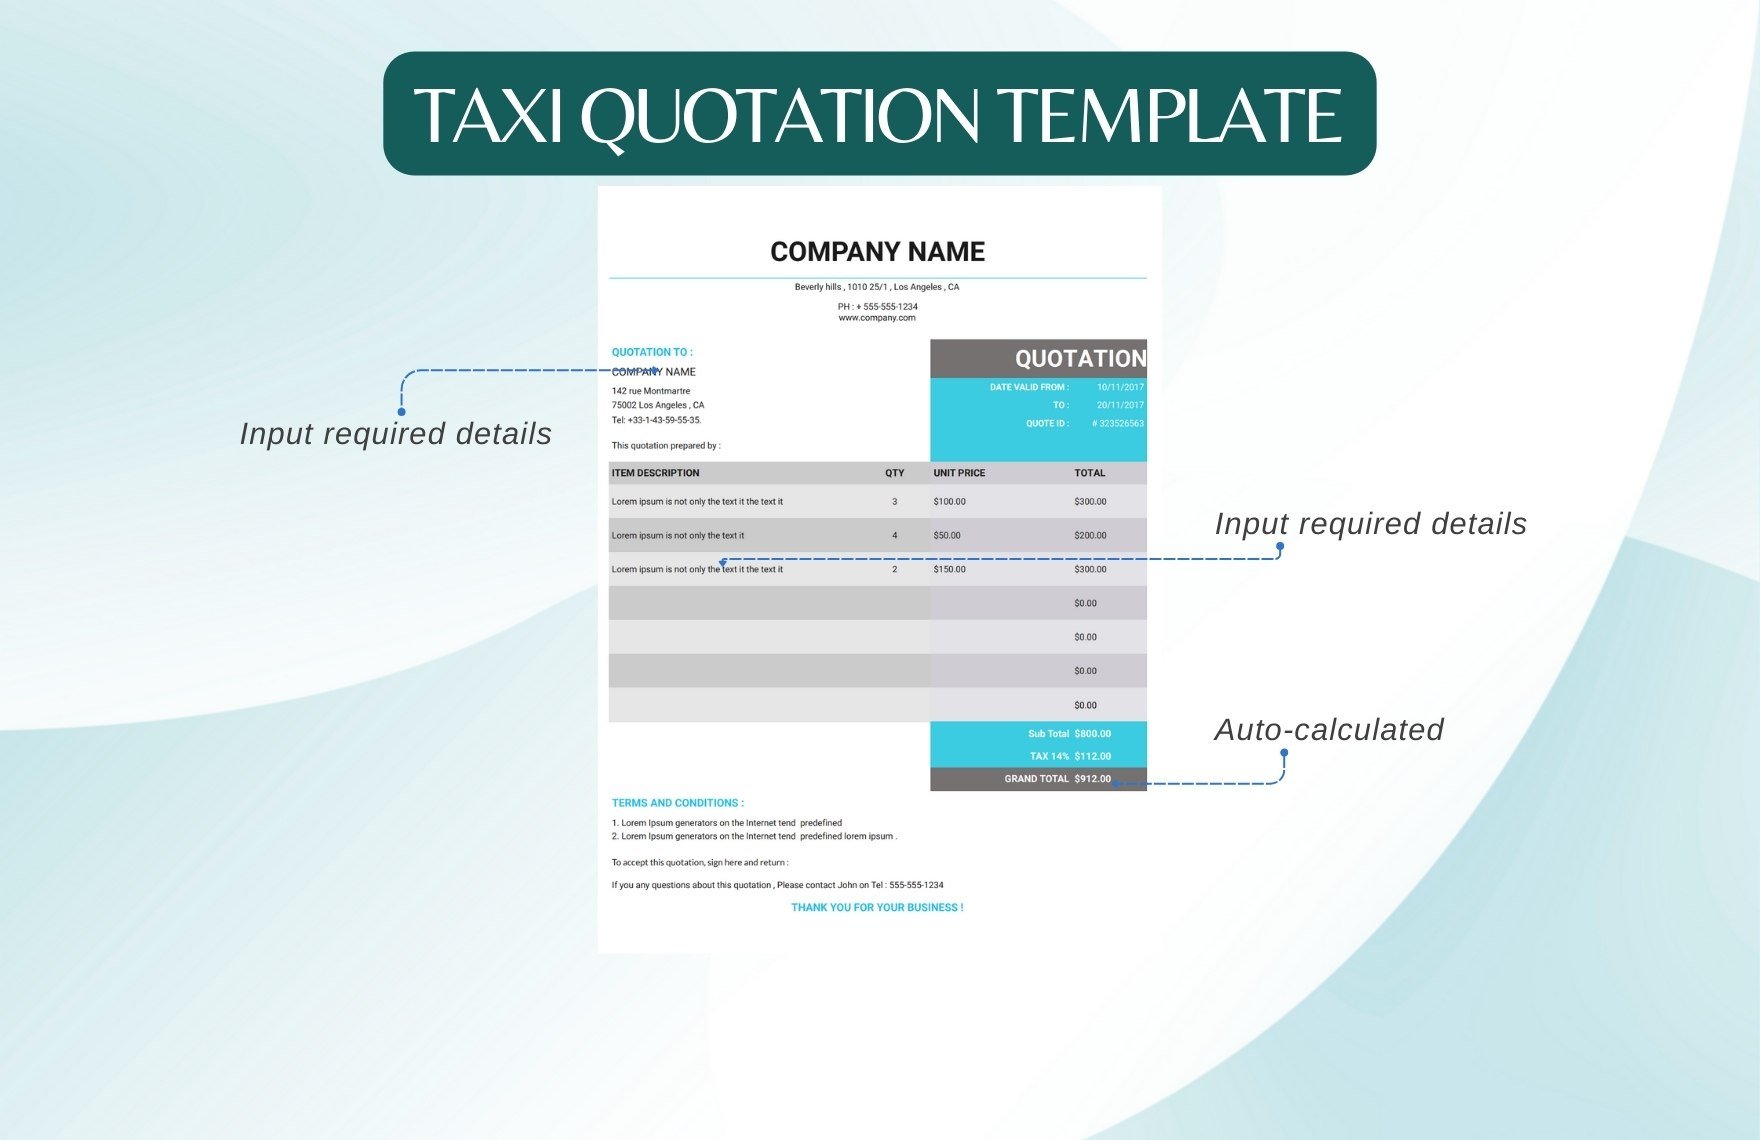 Taxi Quotation Template